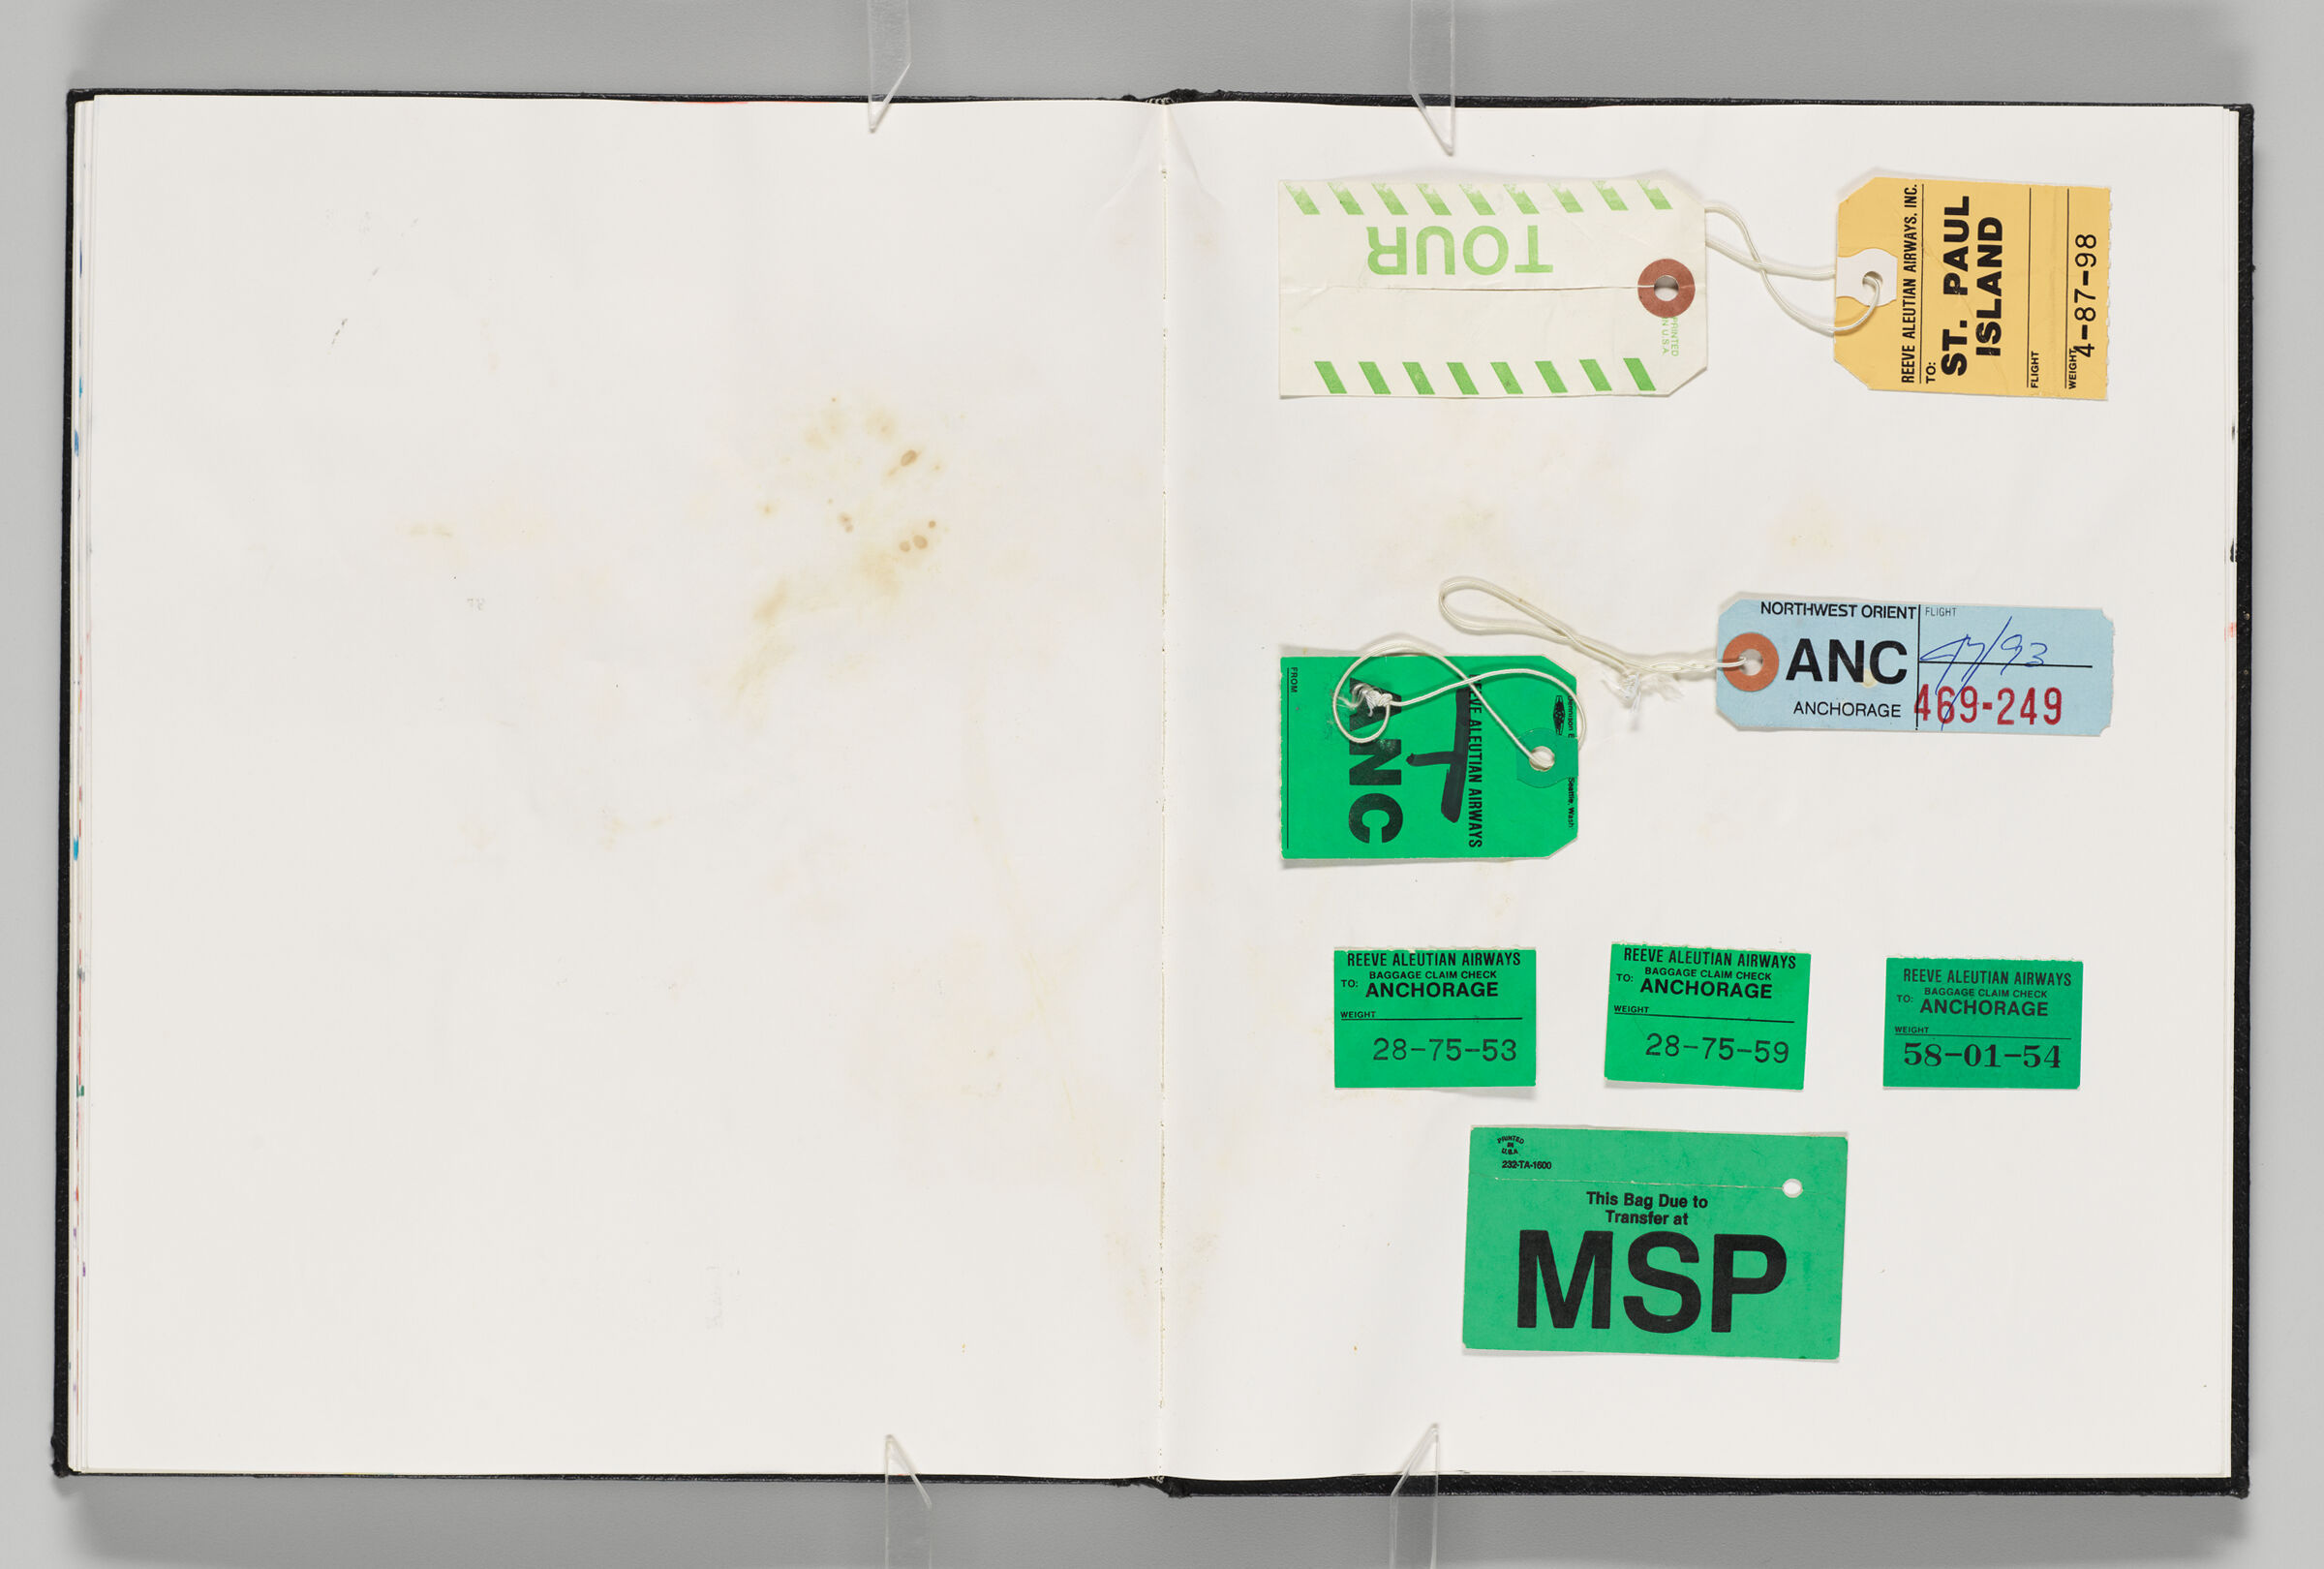 Untitled (Bleed-Through Of Flower Stains, Left Page); Untitled (Adhered Luggage Tags, Right Page)